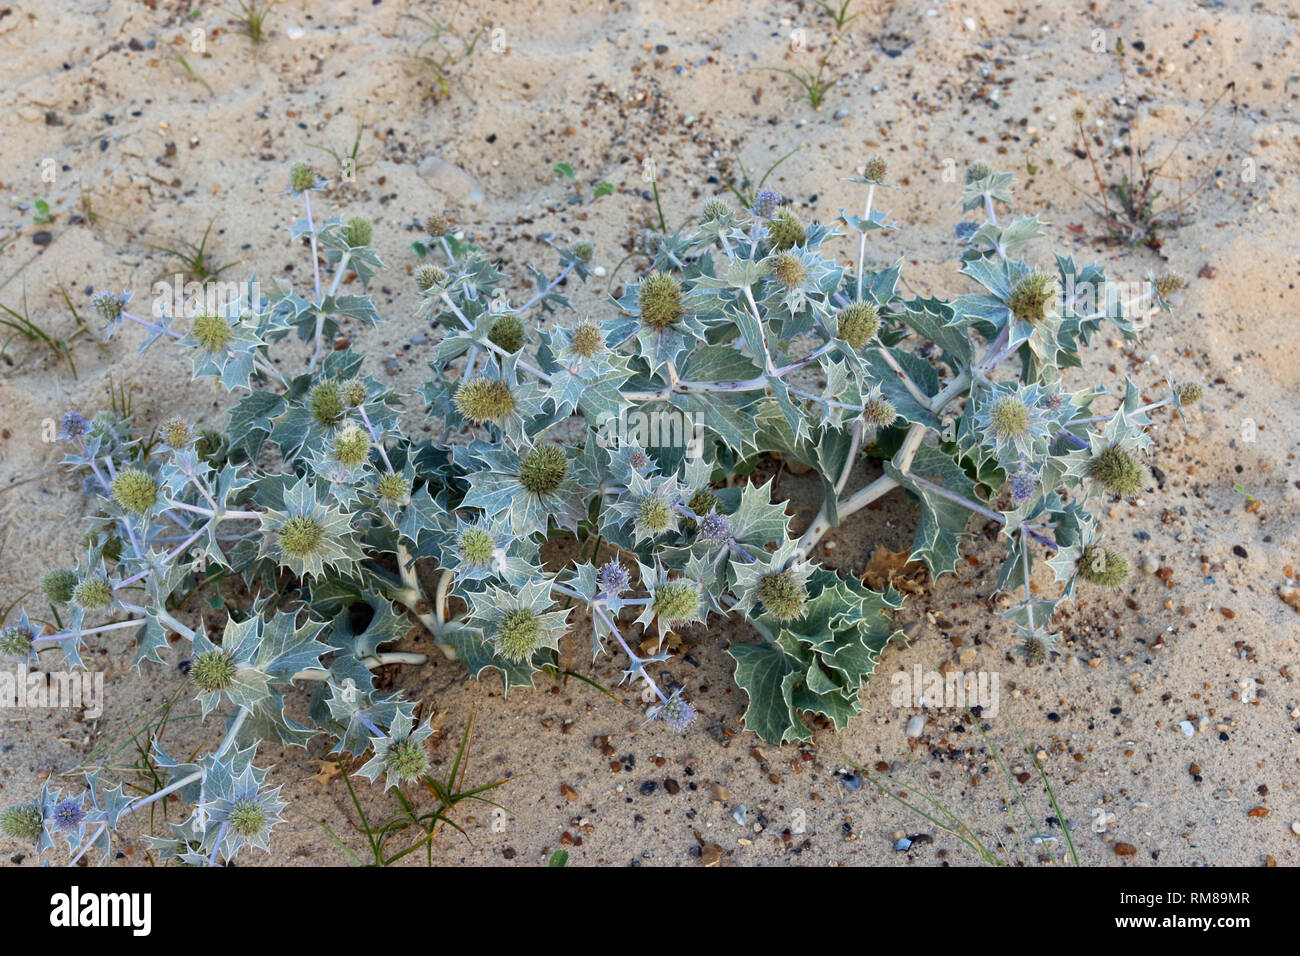 Native UK sea holly, Eryngium maritimum, in flower and growing on a sand dune with grass and sand in the background. Stock Photo